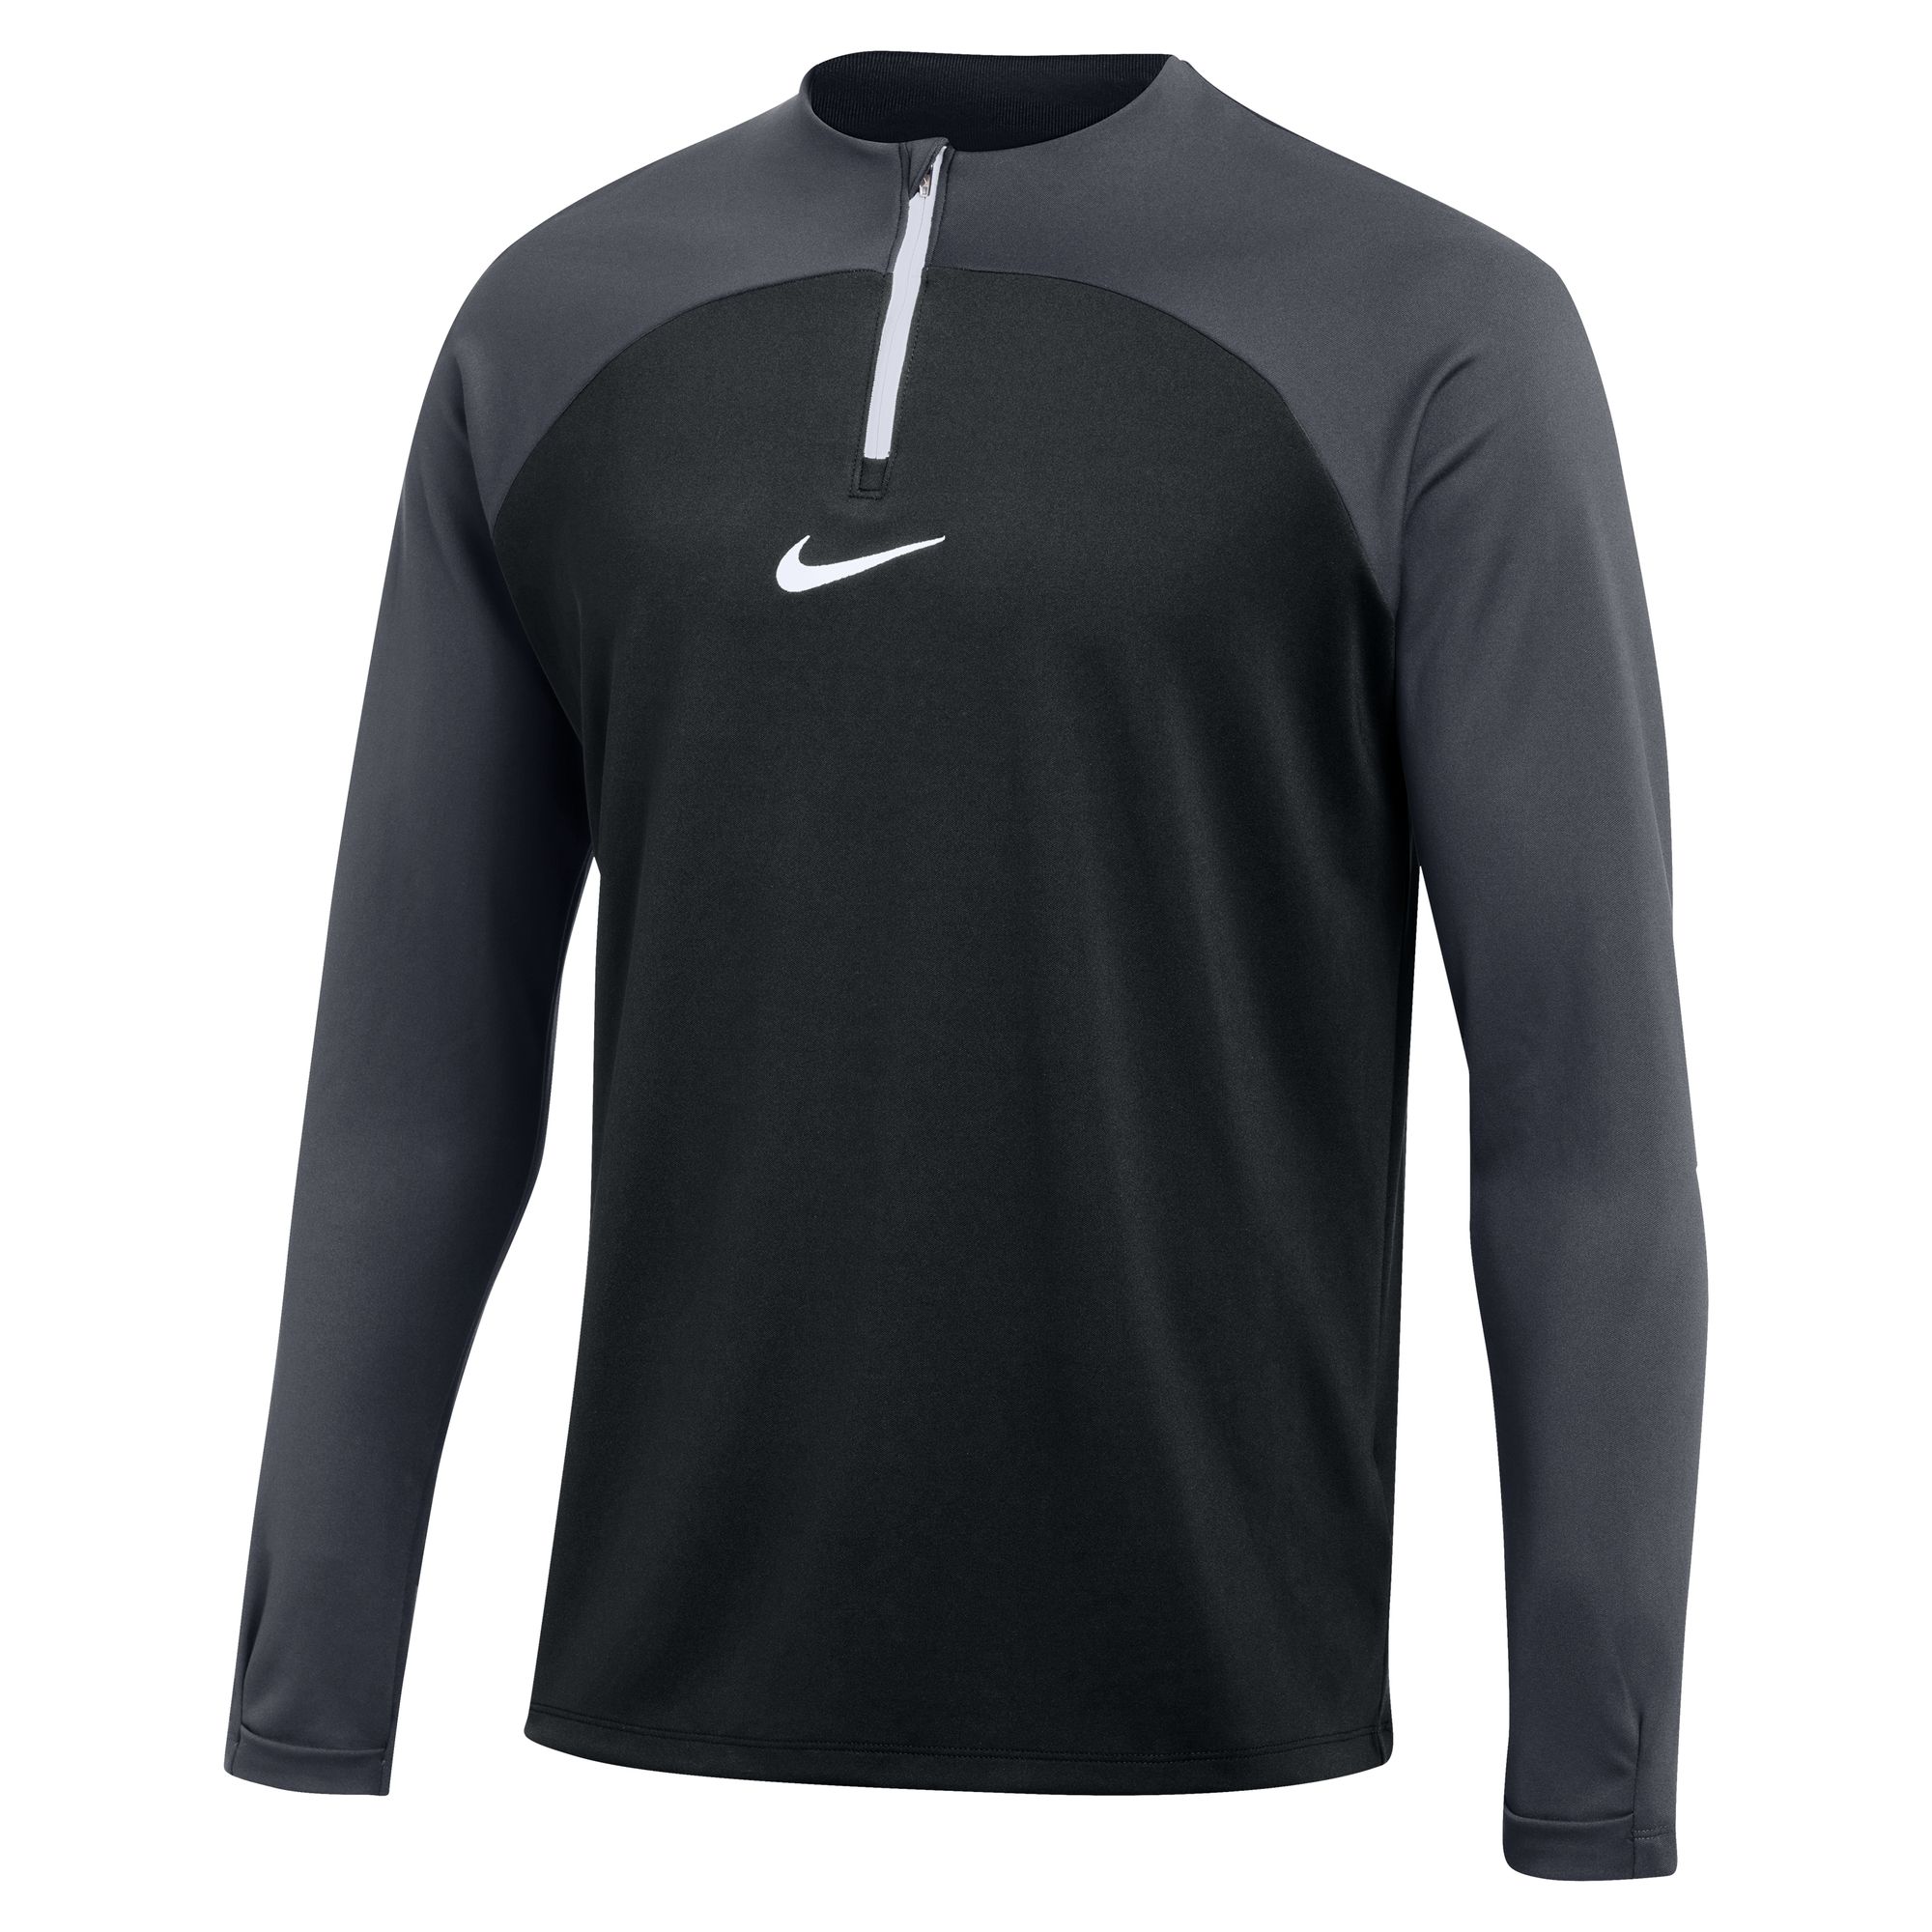 Nike Dri-FIT Academy Pro Long Sleeve Drill Top